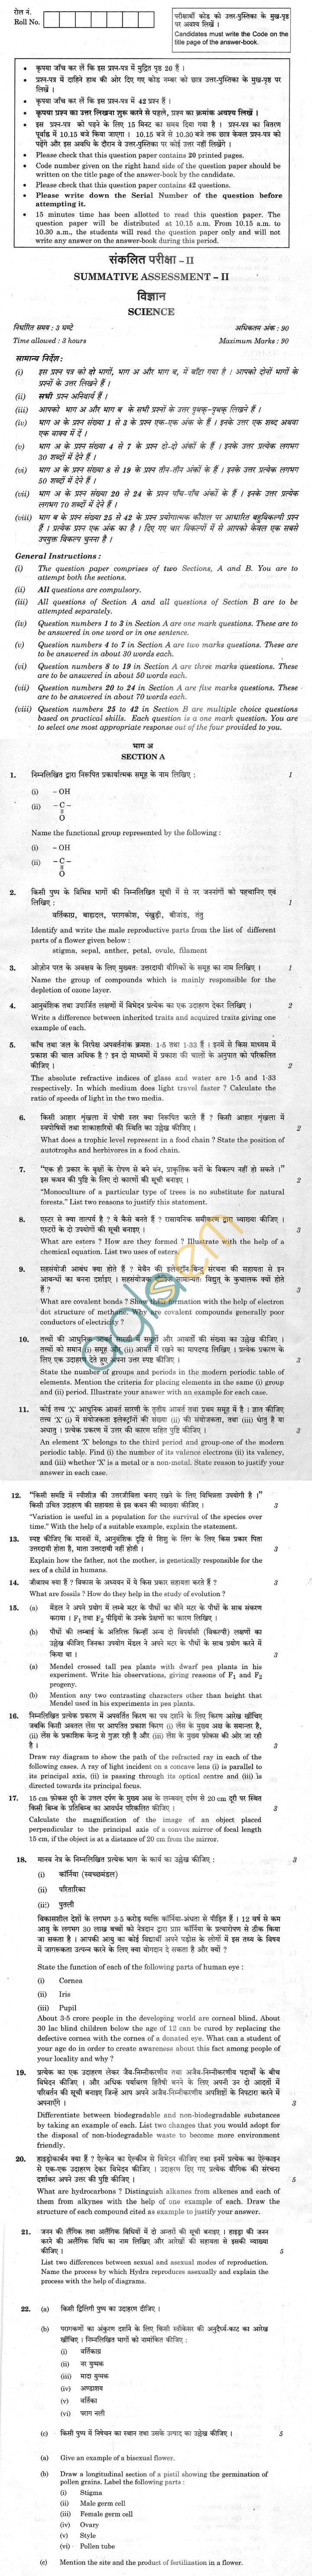 CBSE Compartment Exam 2013 Class X Question Paper - Science